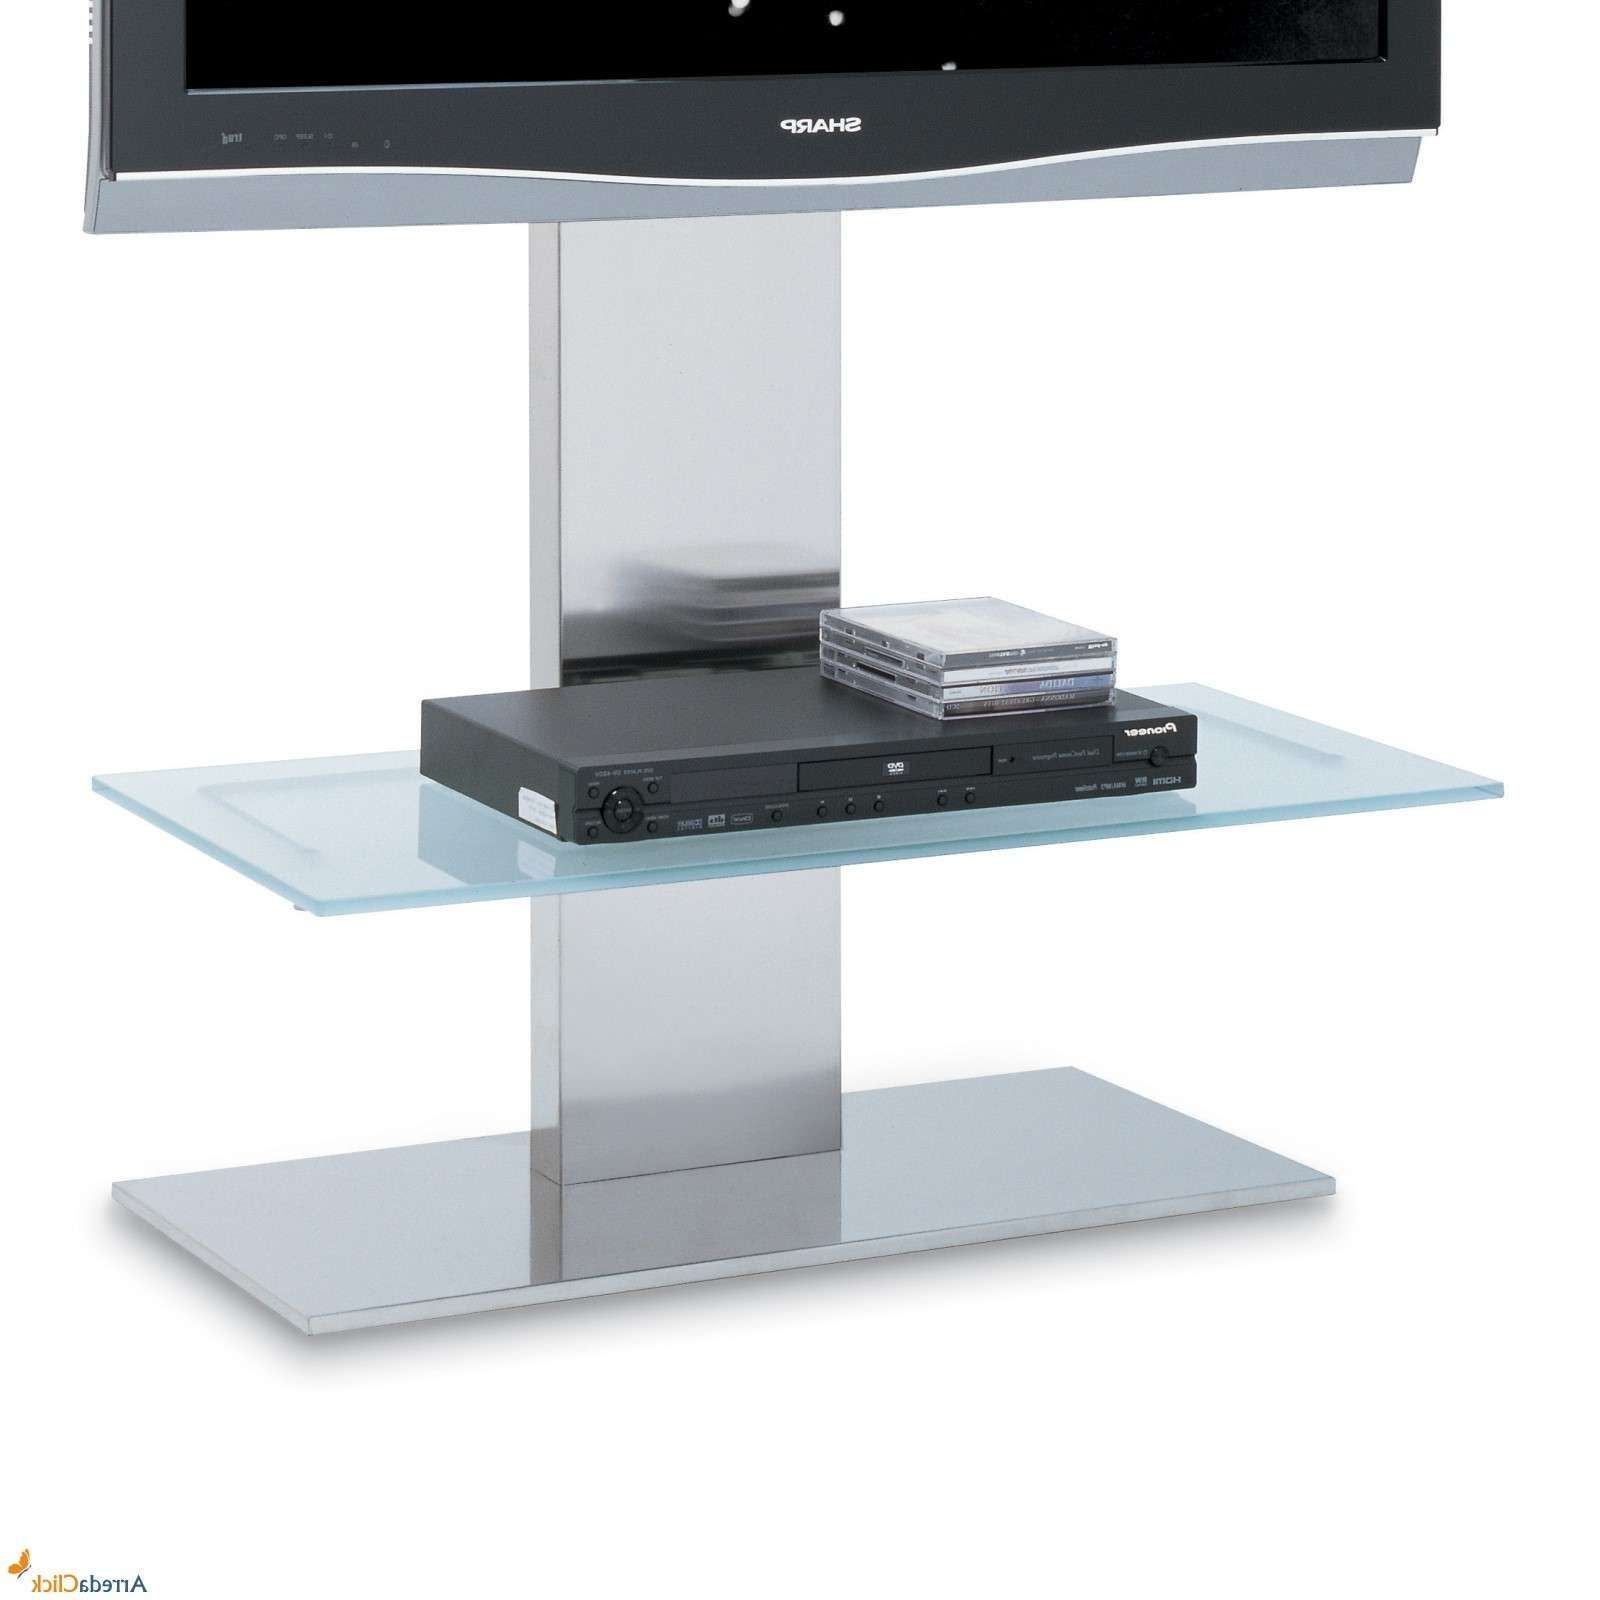 Tv Stands : Silver Tv Stands For Flat Screens Stand Adjustable Intended For Silver Tv Stands (View 1 of 15)